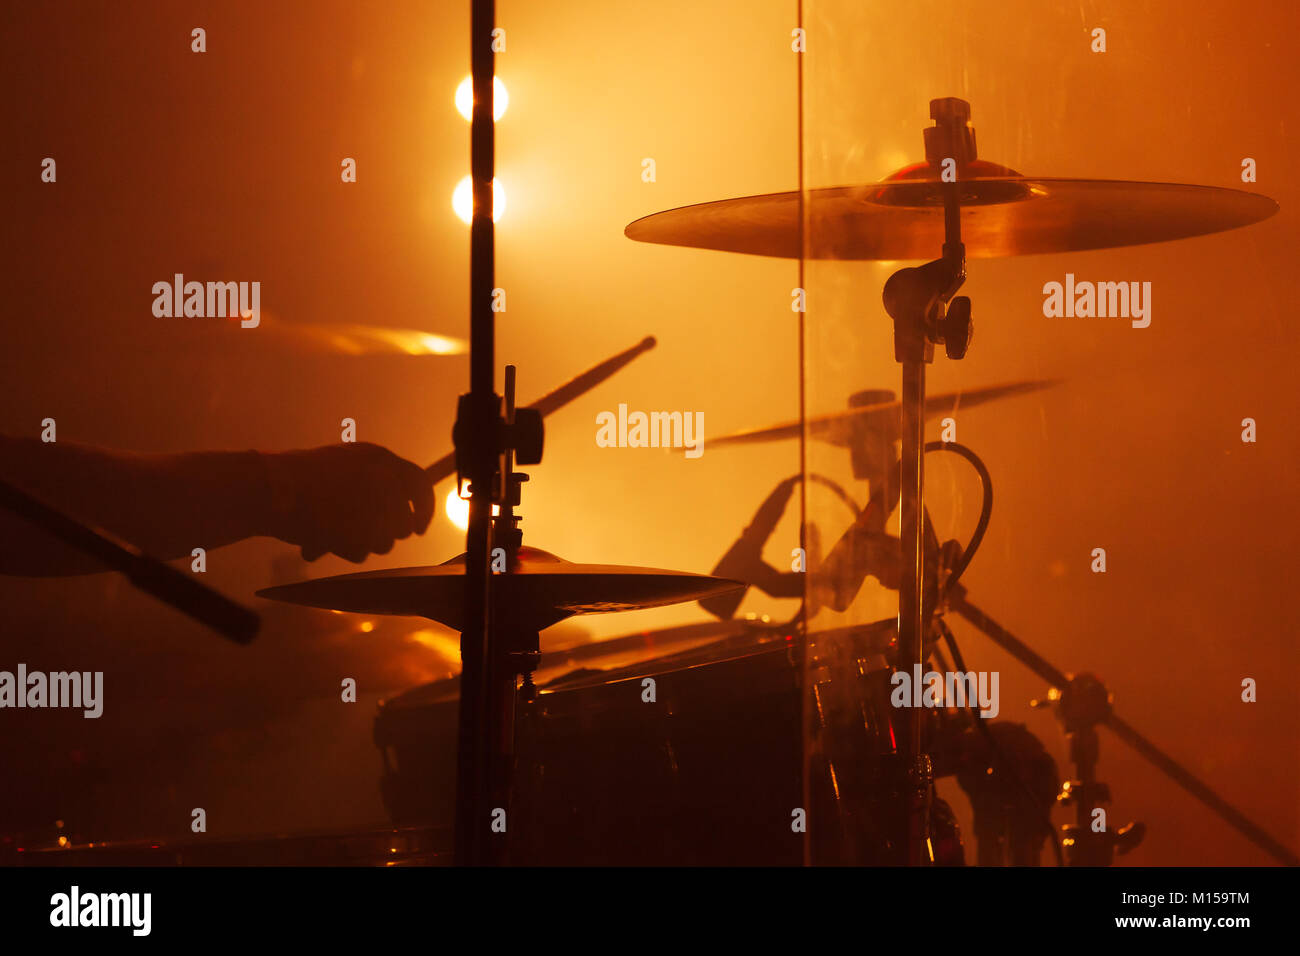 Live music background, drum set with cymbals and drummer hand Stock Photo